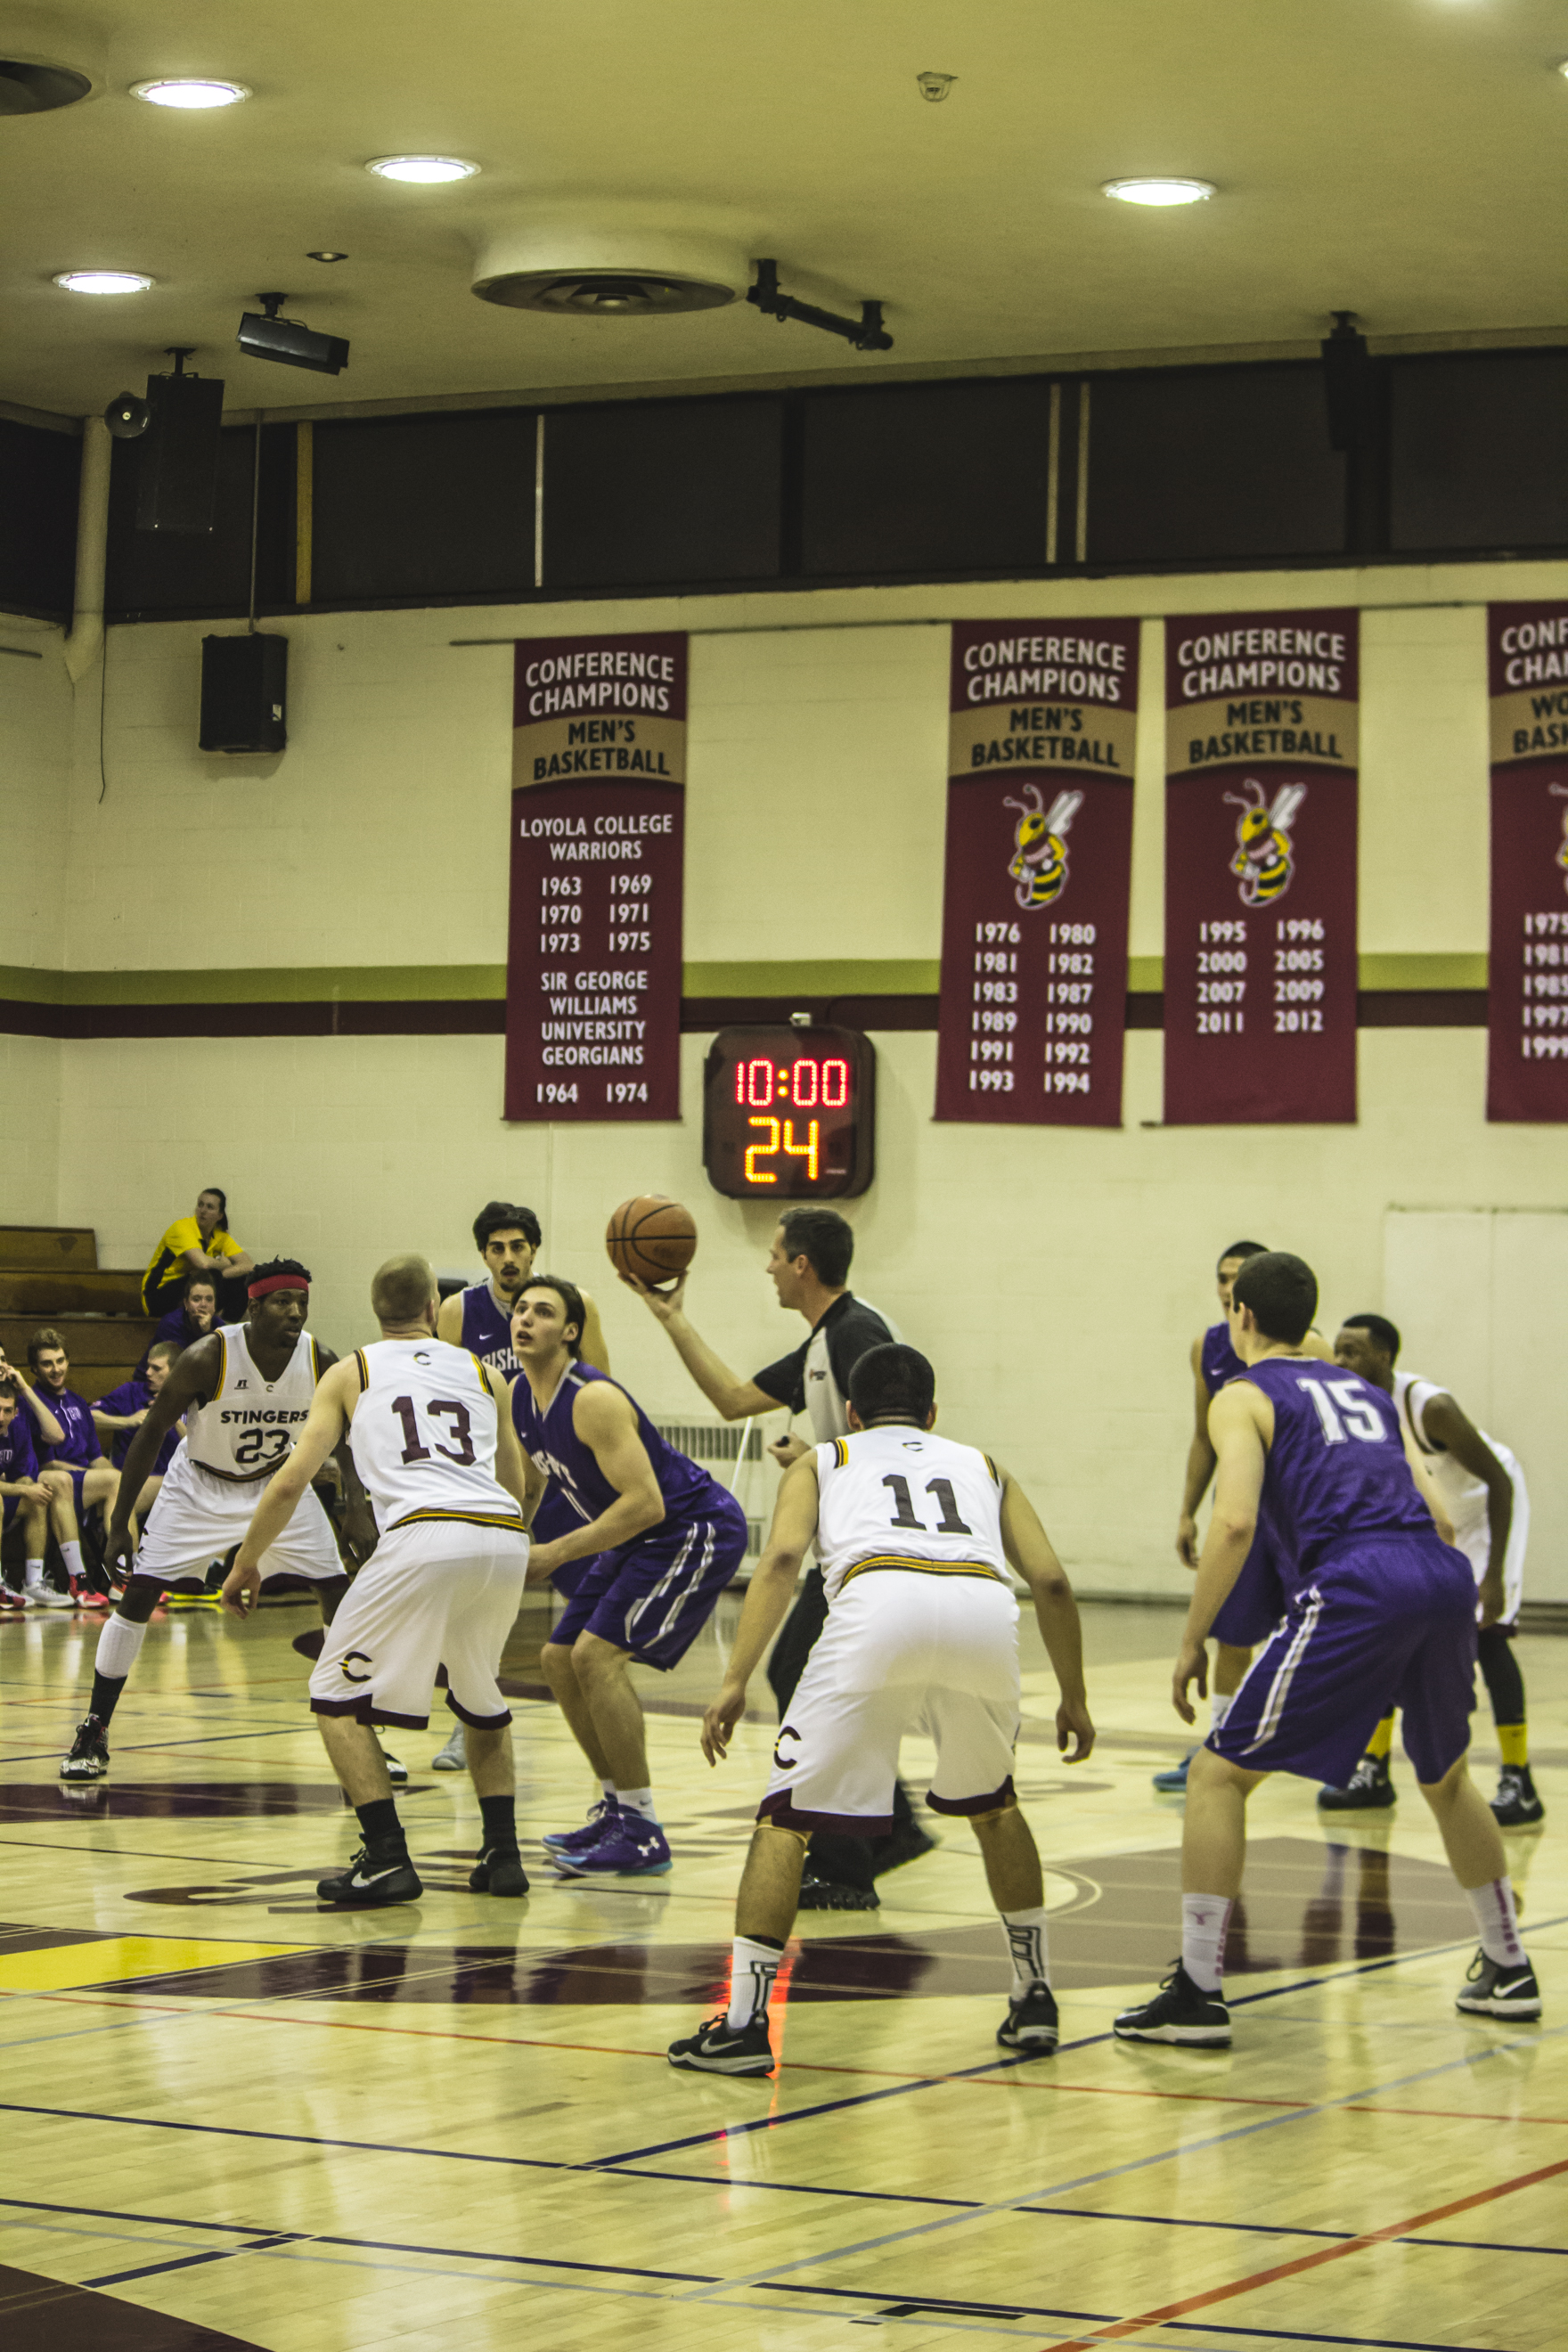 The Stingers men’s basketball team goes for the ball off of the opening jump ball. Photos by Melissa Martella.